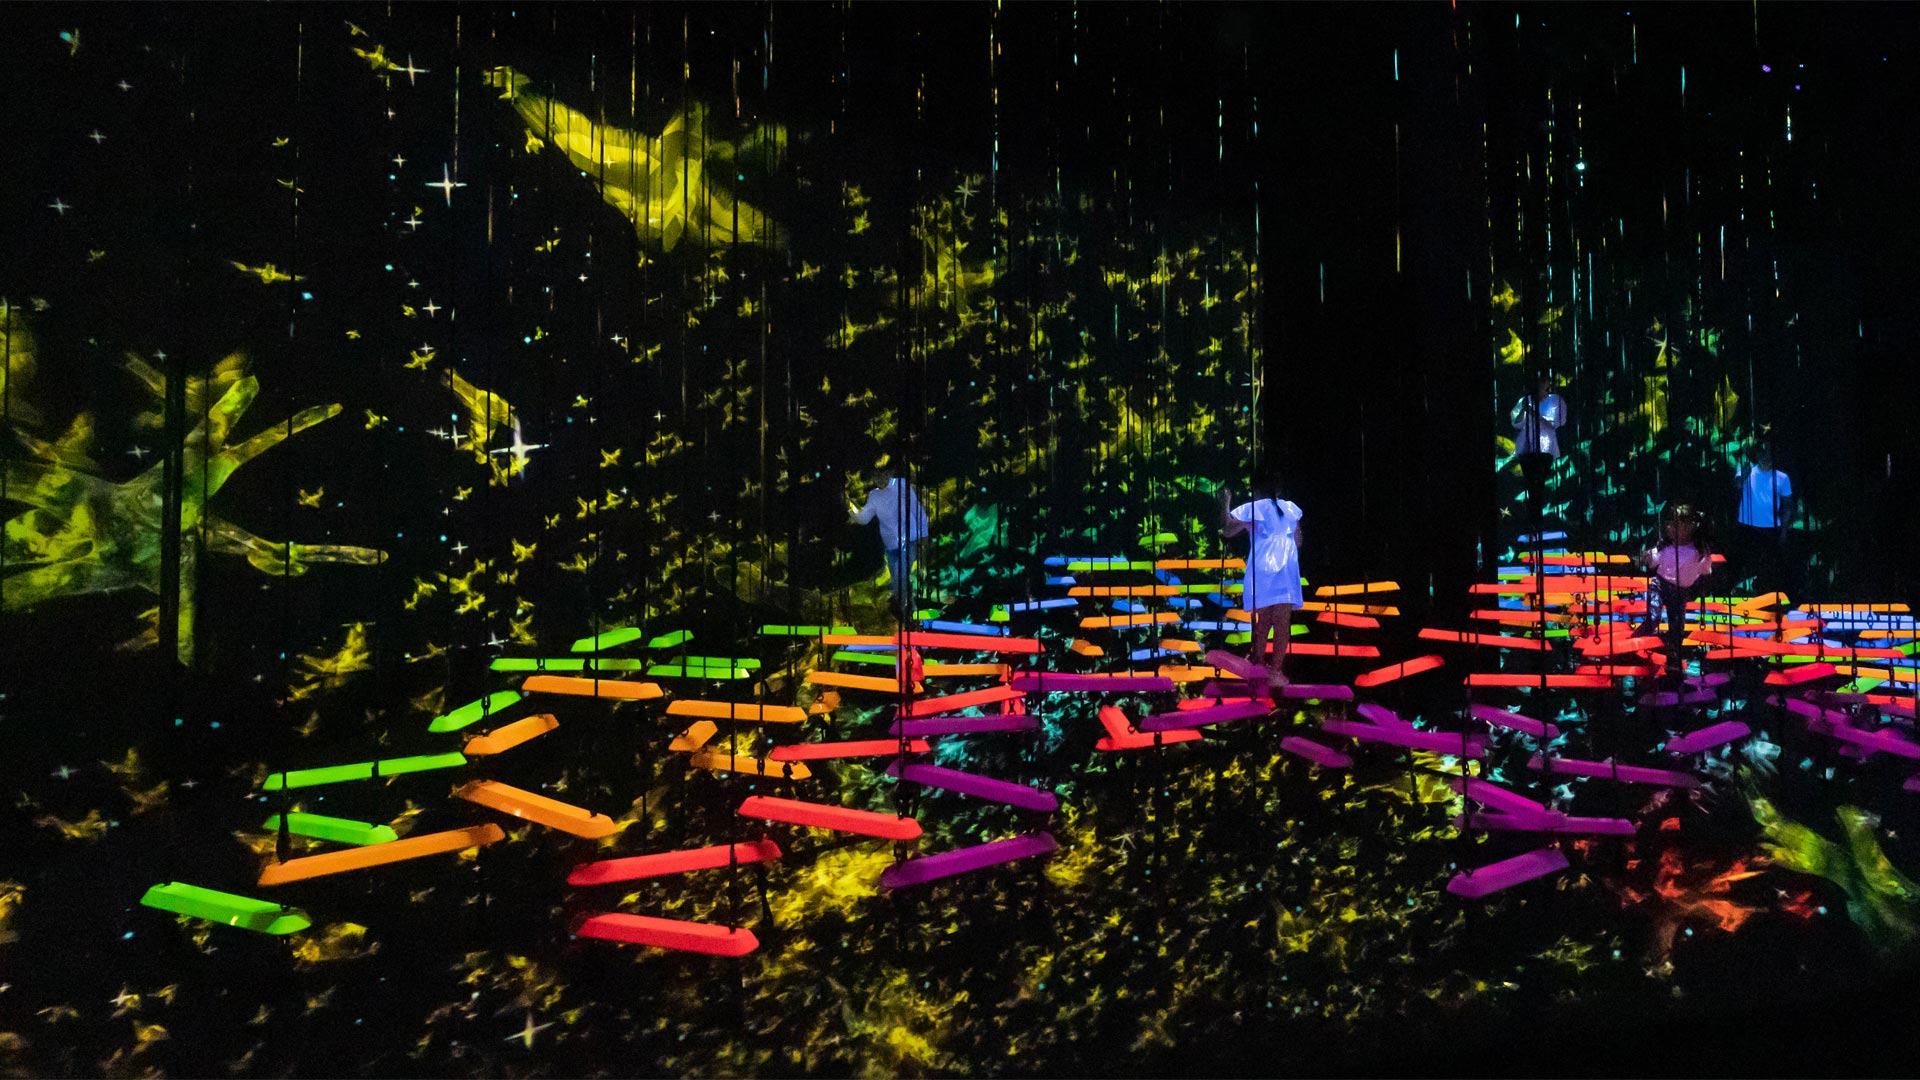 Immersive digital art at a virtual reality themed musuem in Singapore